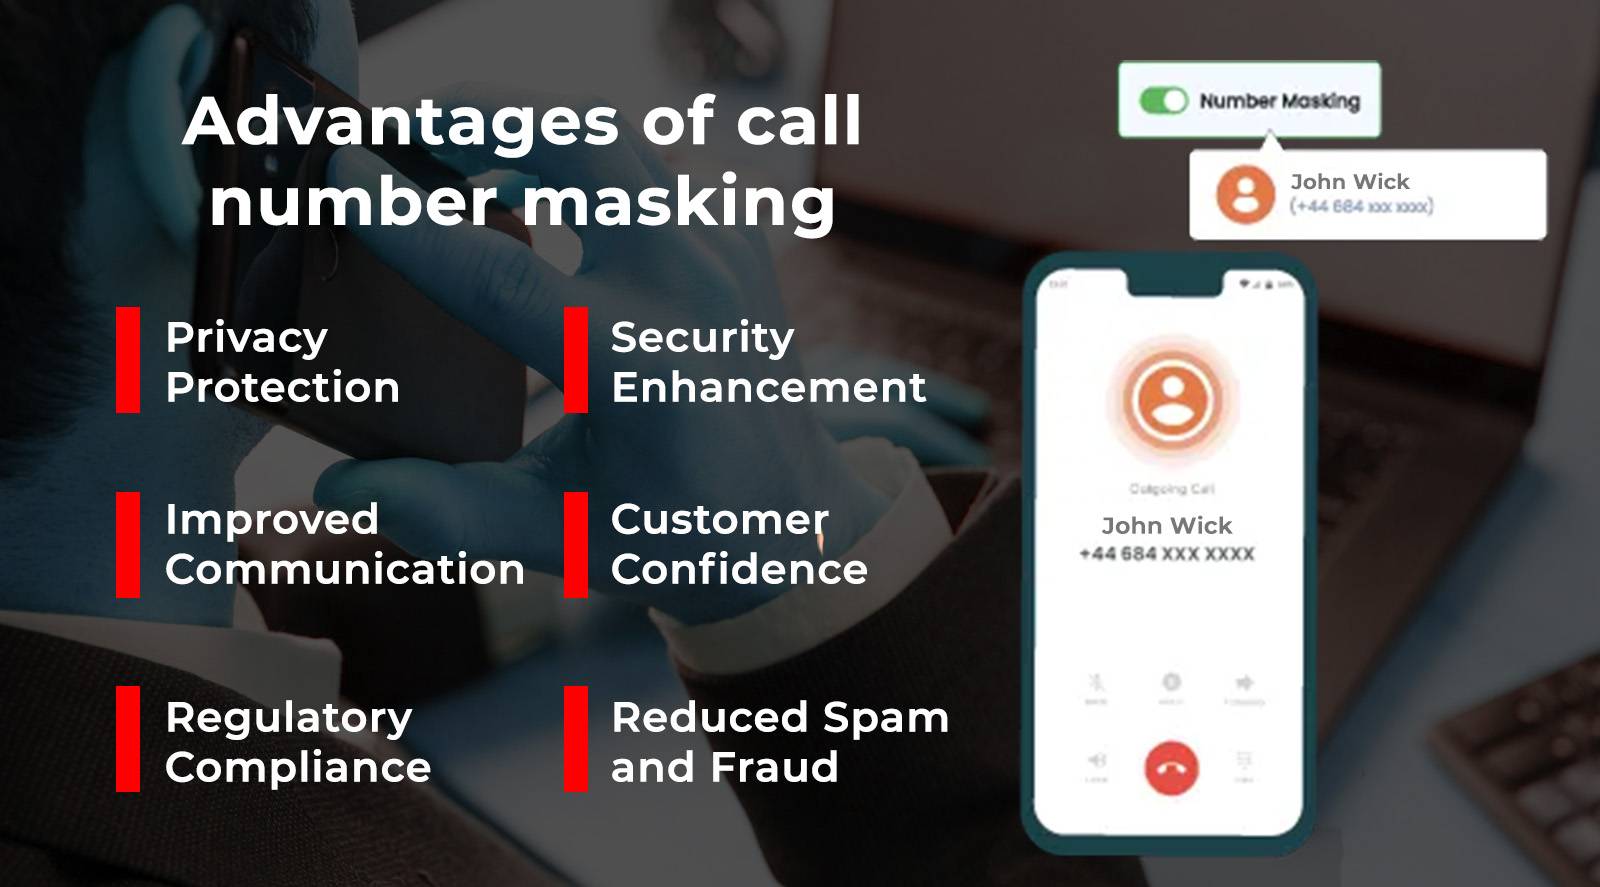 Advantages of call number masking